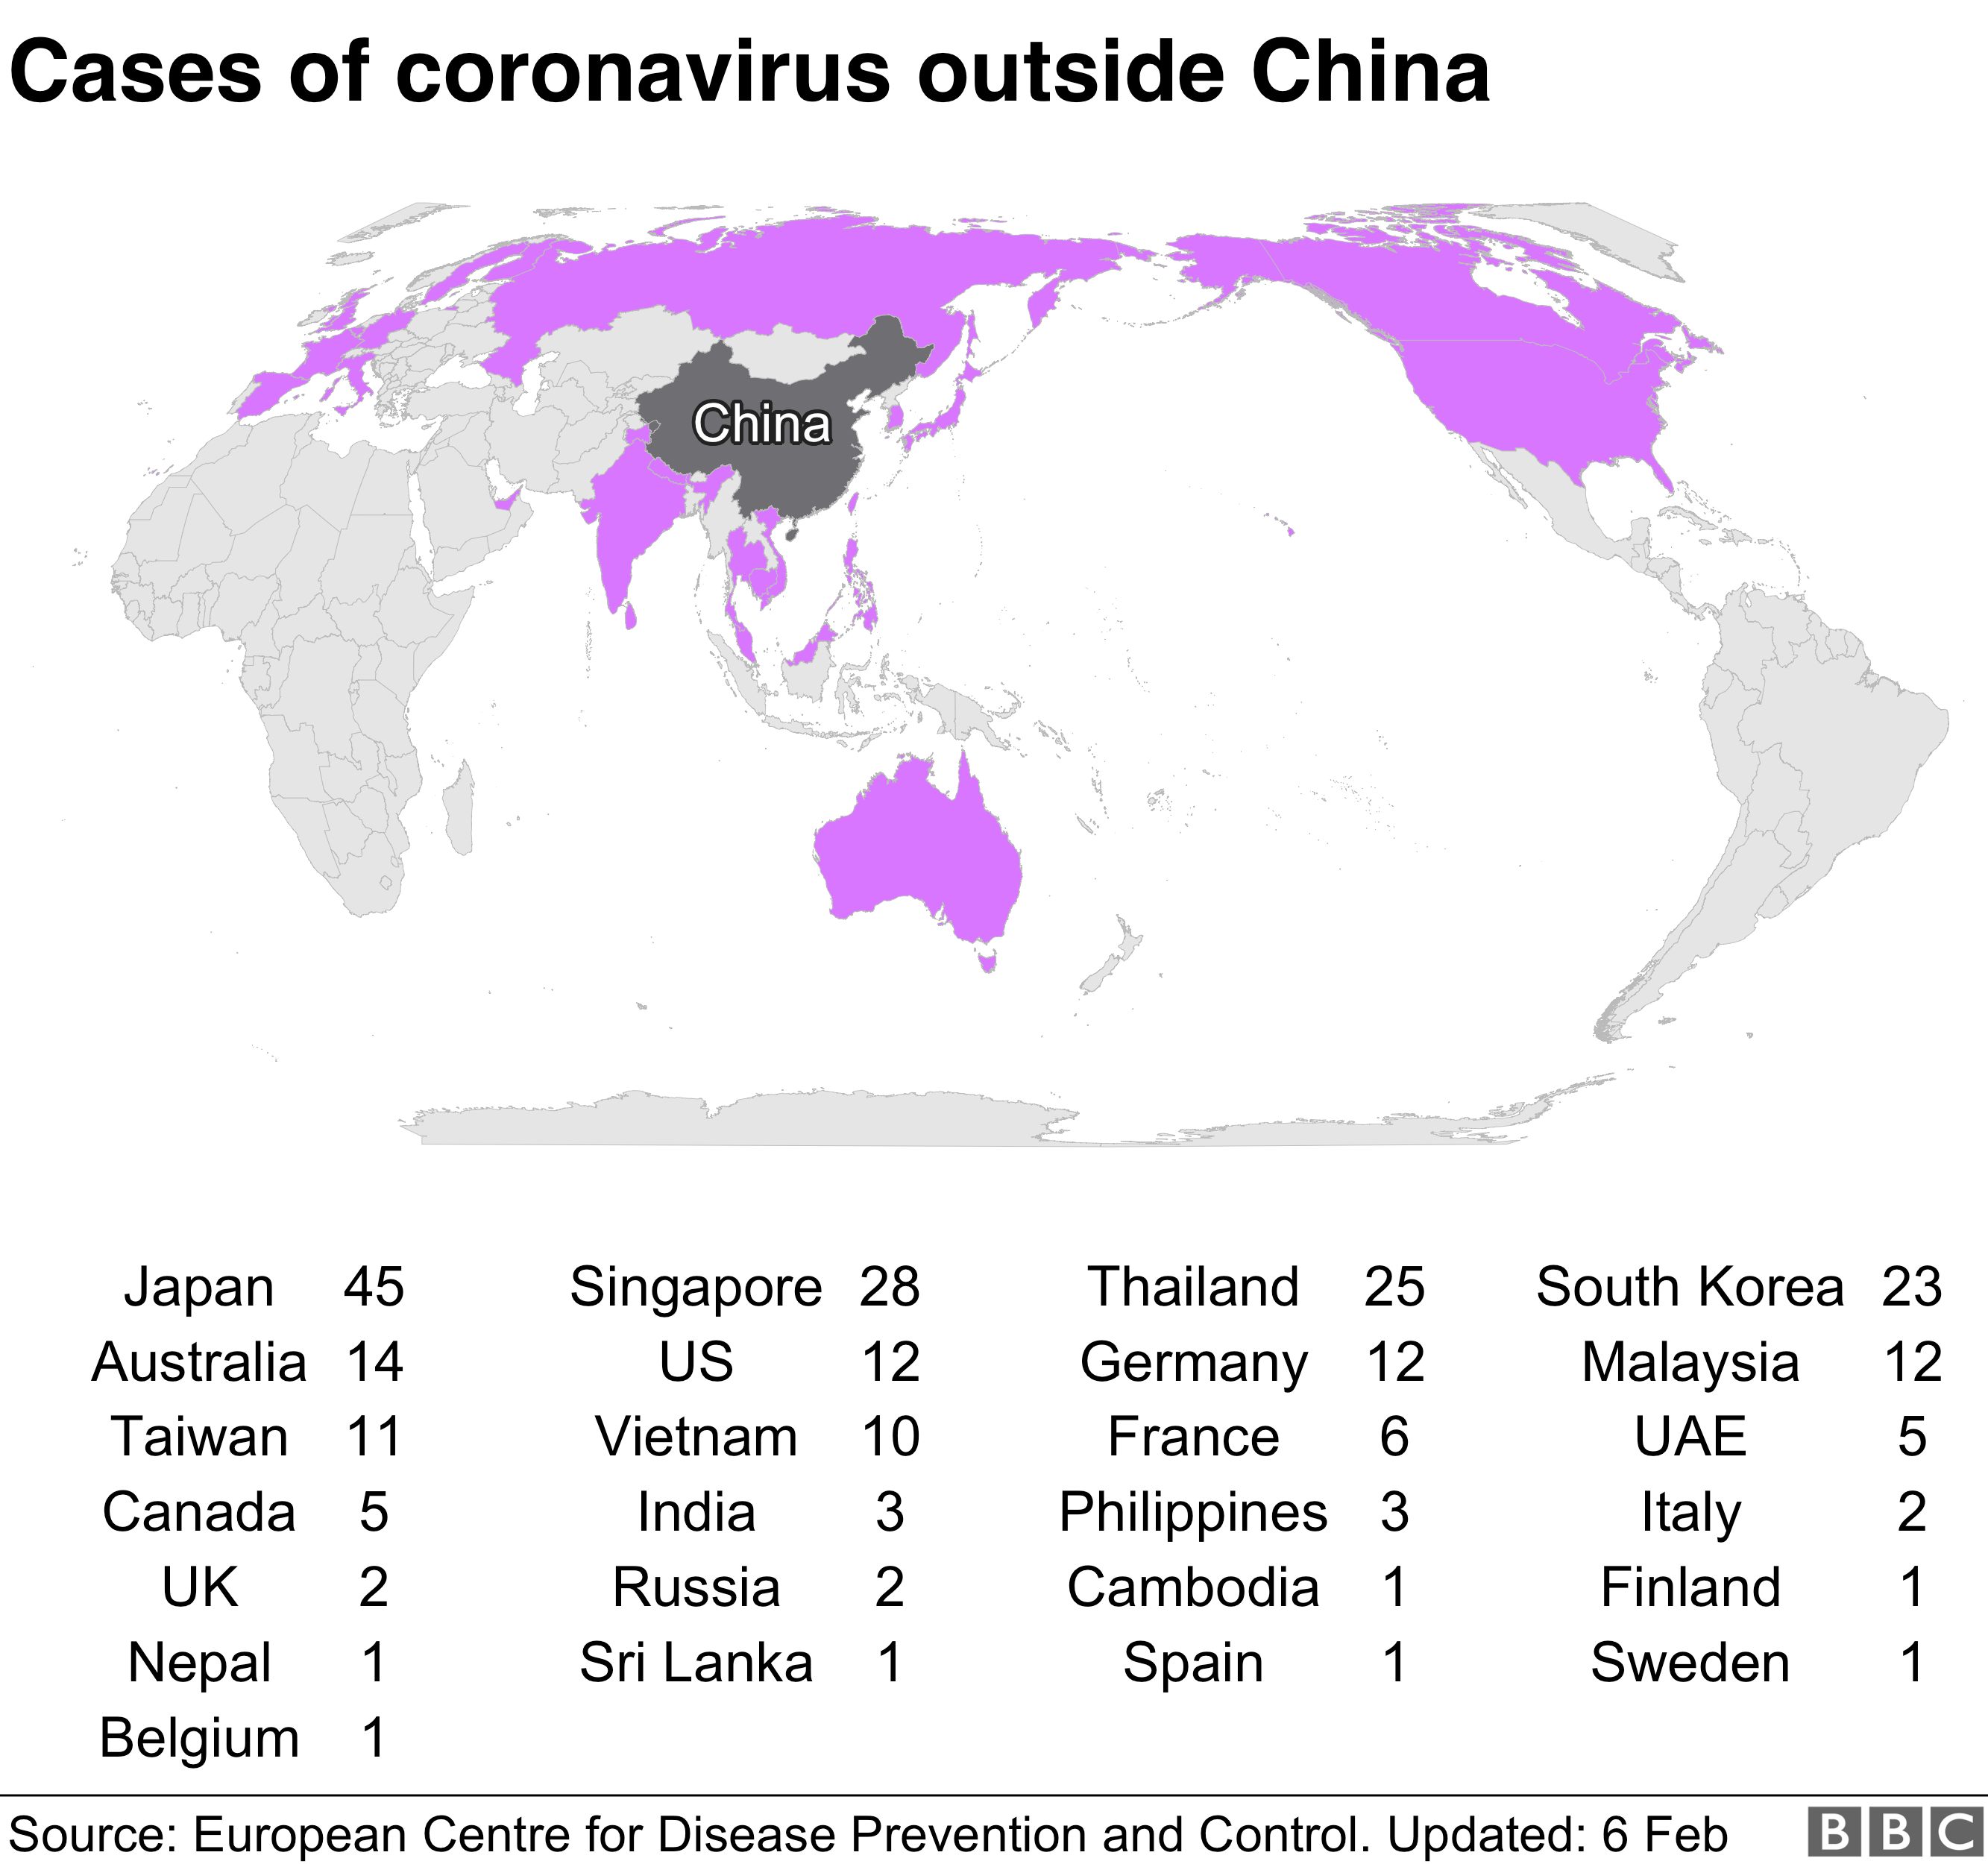 Global cases